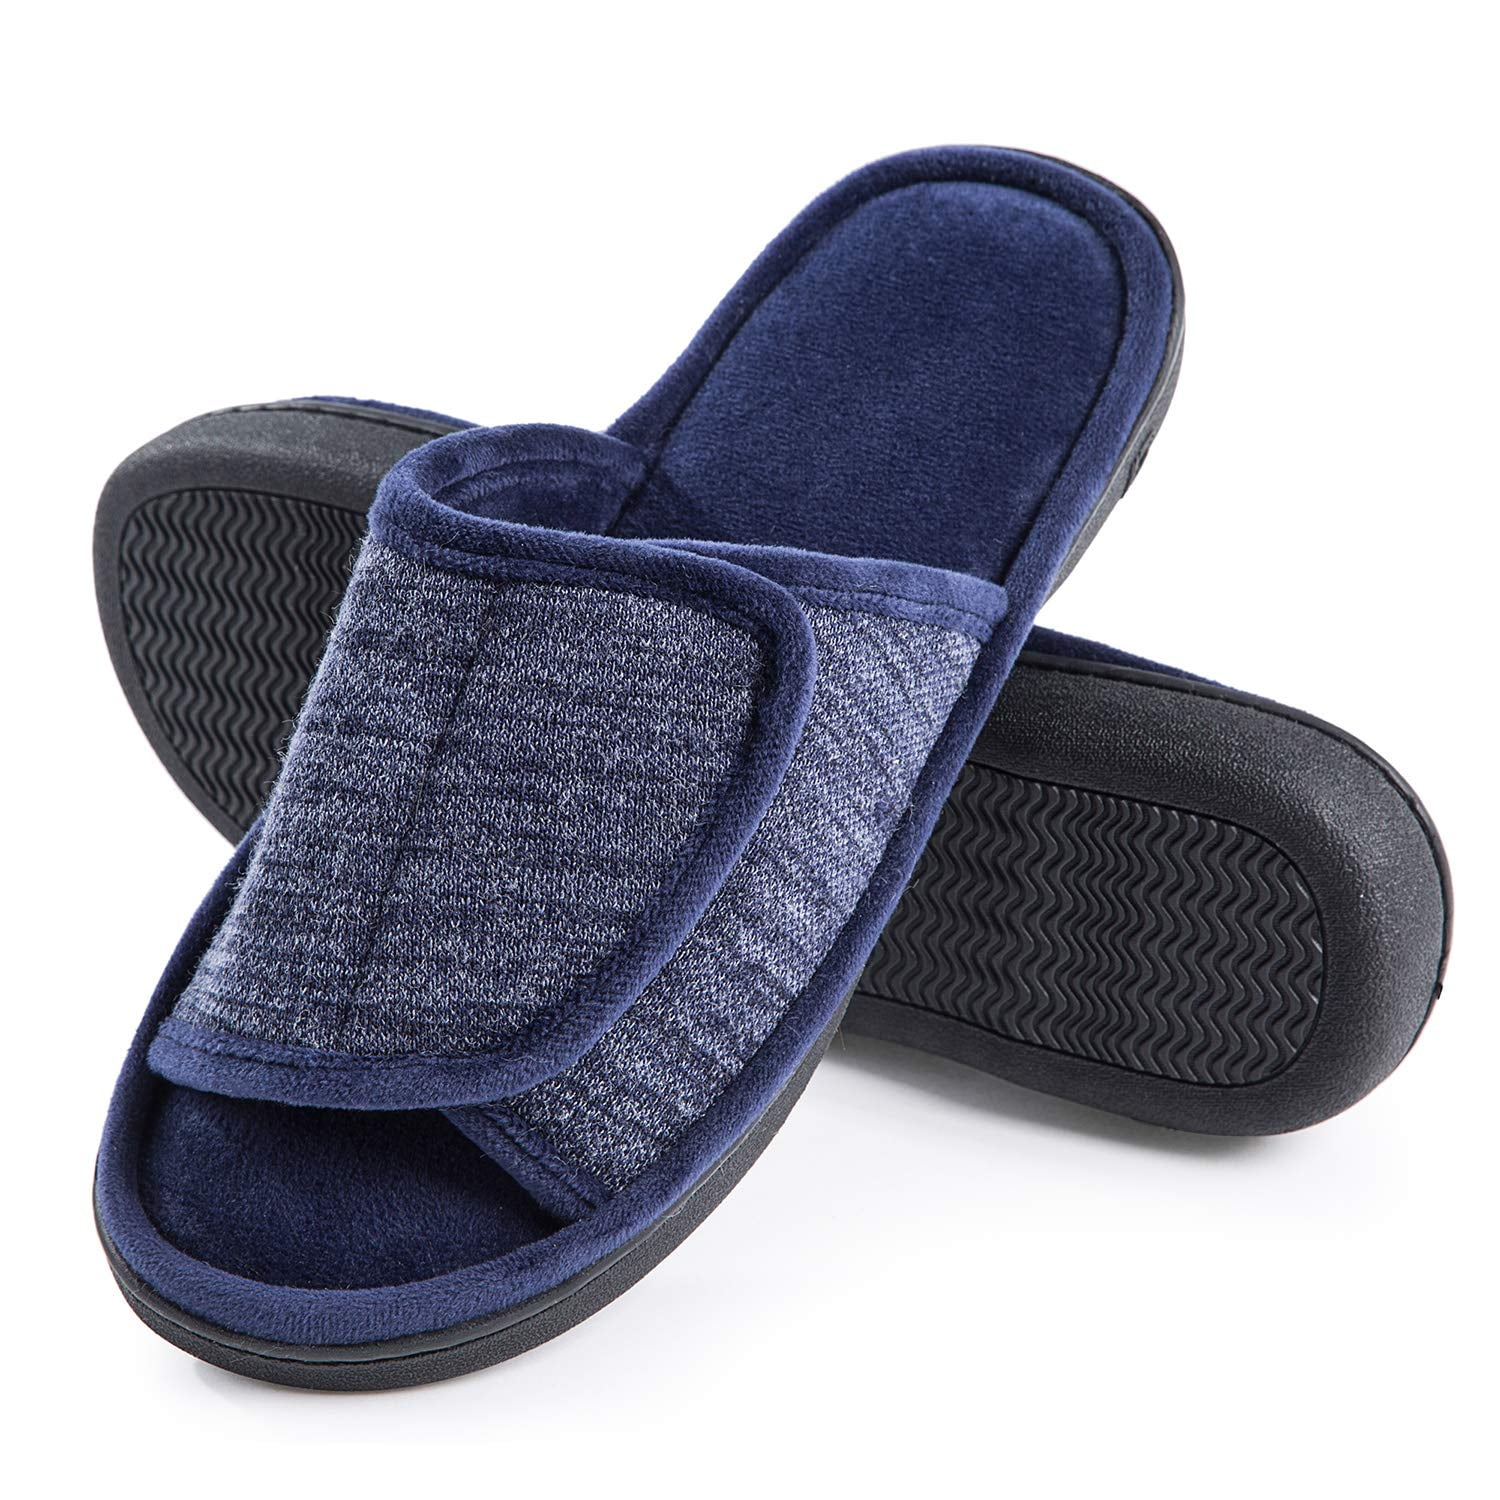 HomeIdeas Mens Classic Memory Foam Plush House Slippers Spring Summer Breathable Indoor/Outdoor Shoes 